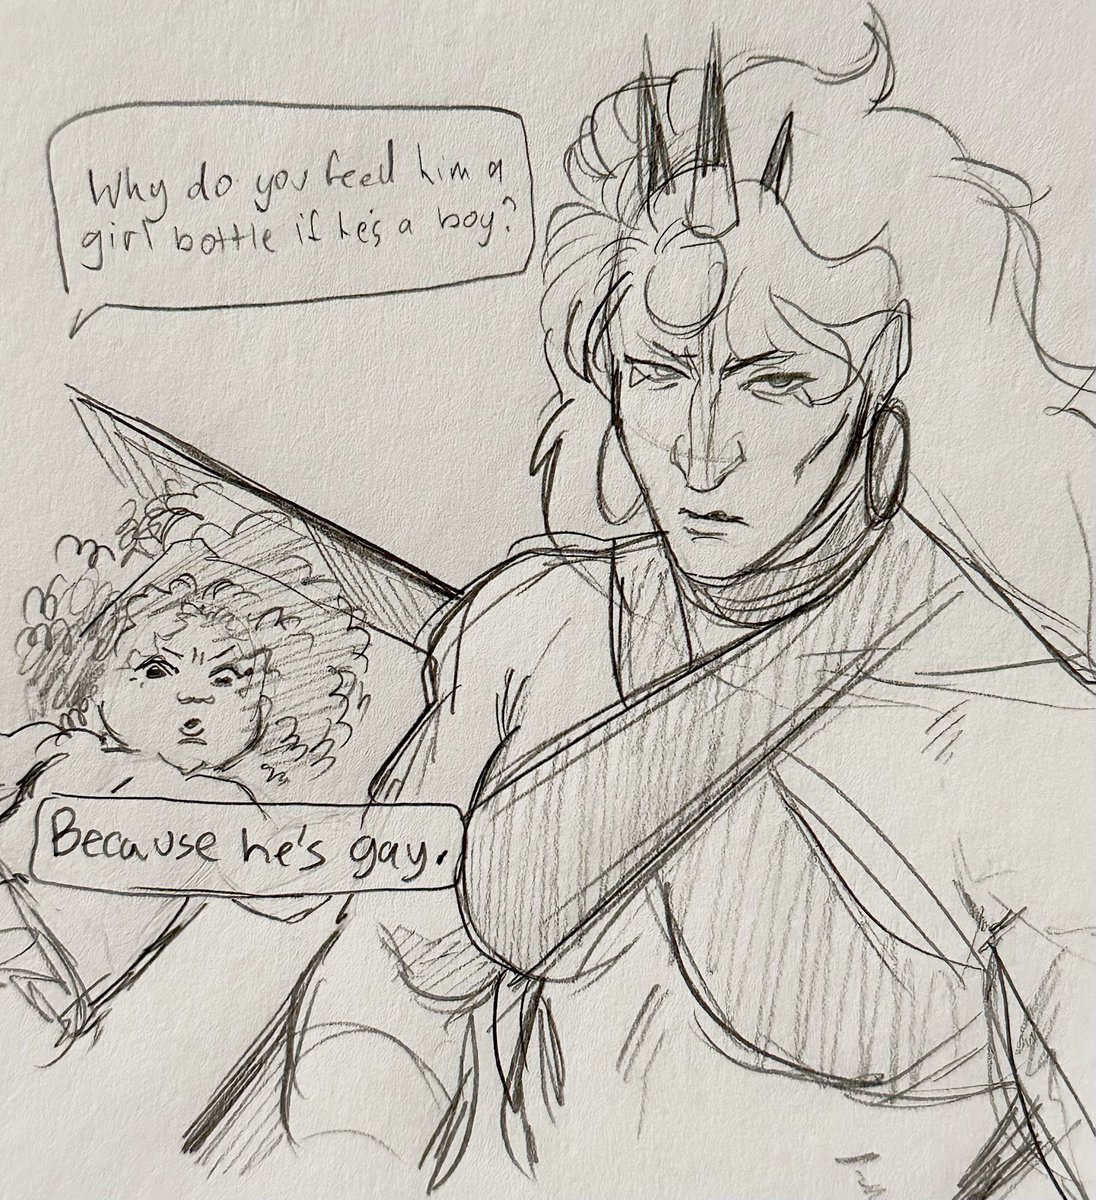 I barely have an eraser on my pencil... baby kars and ramona